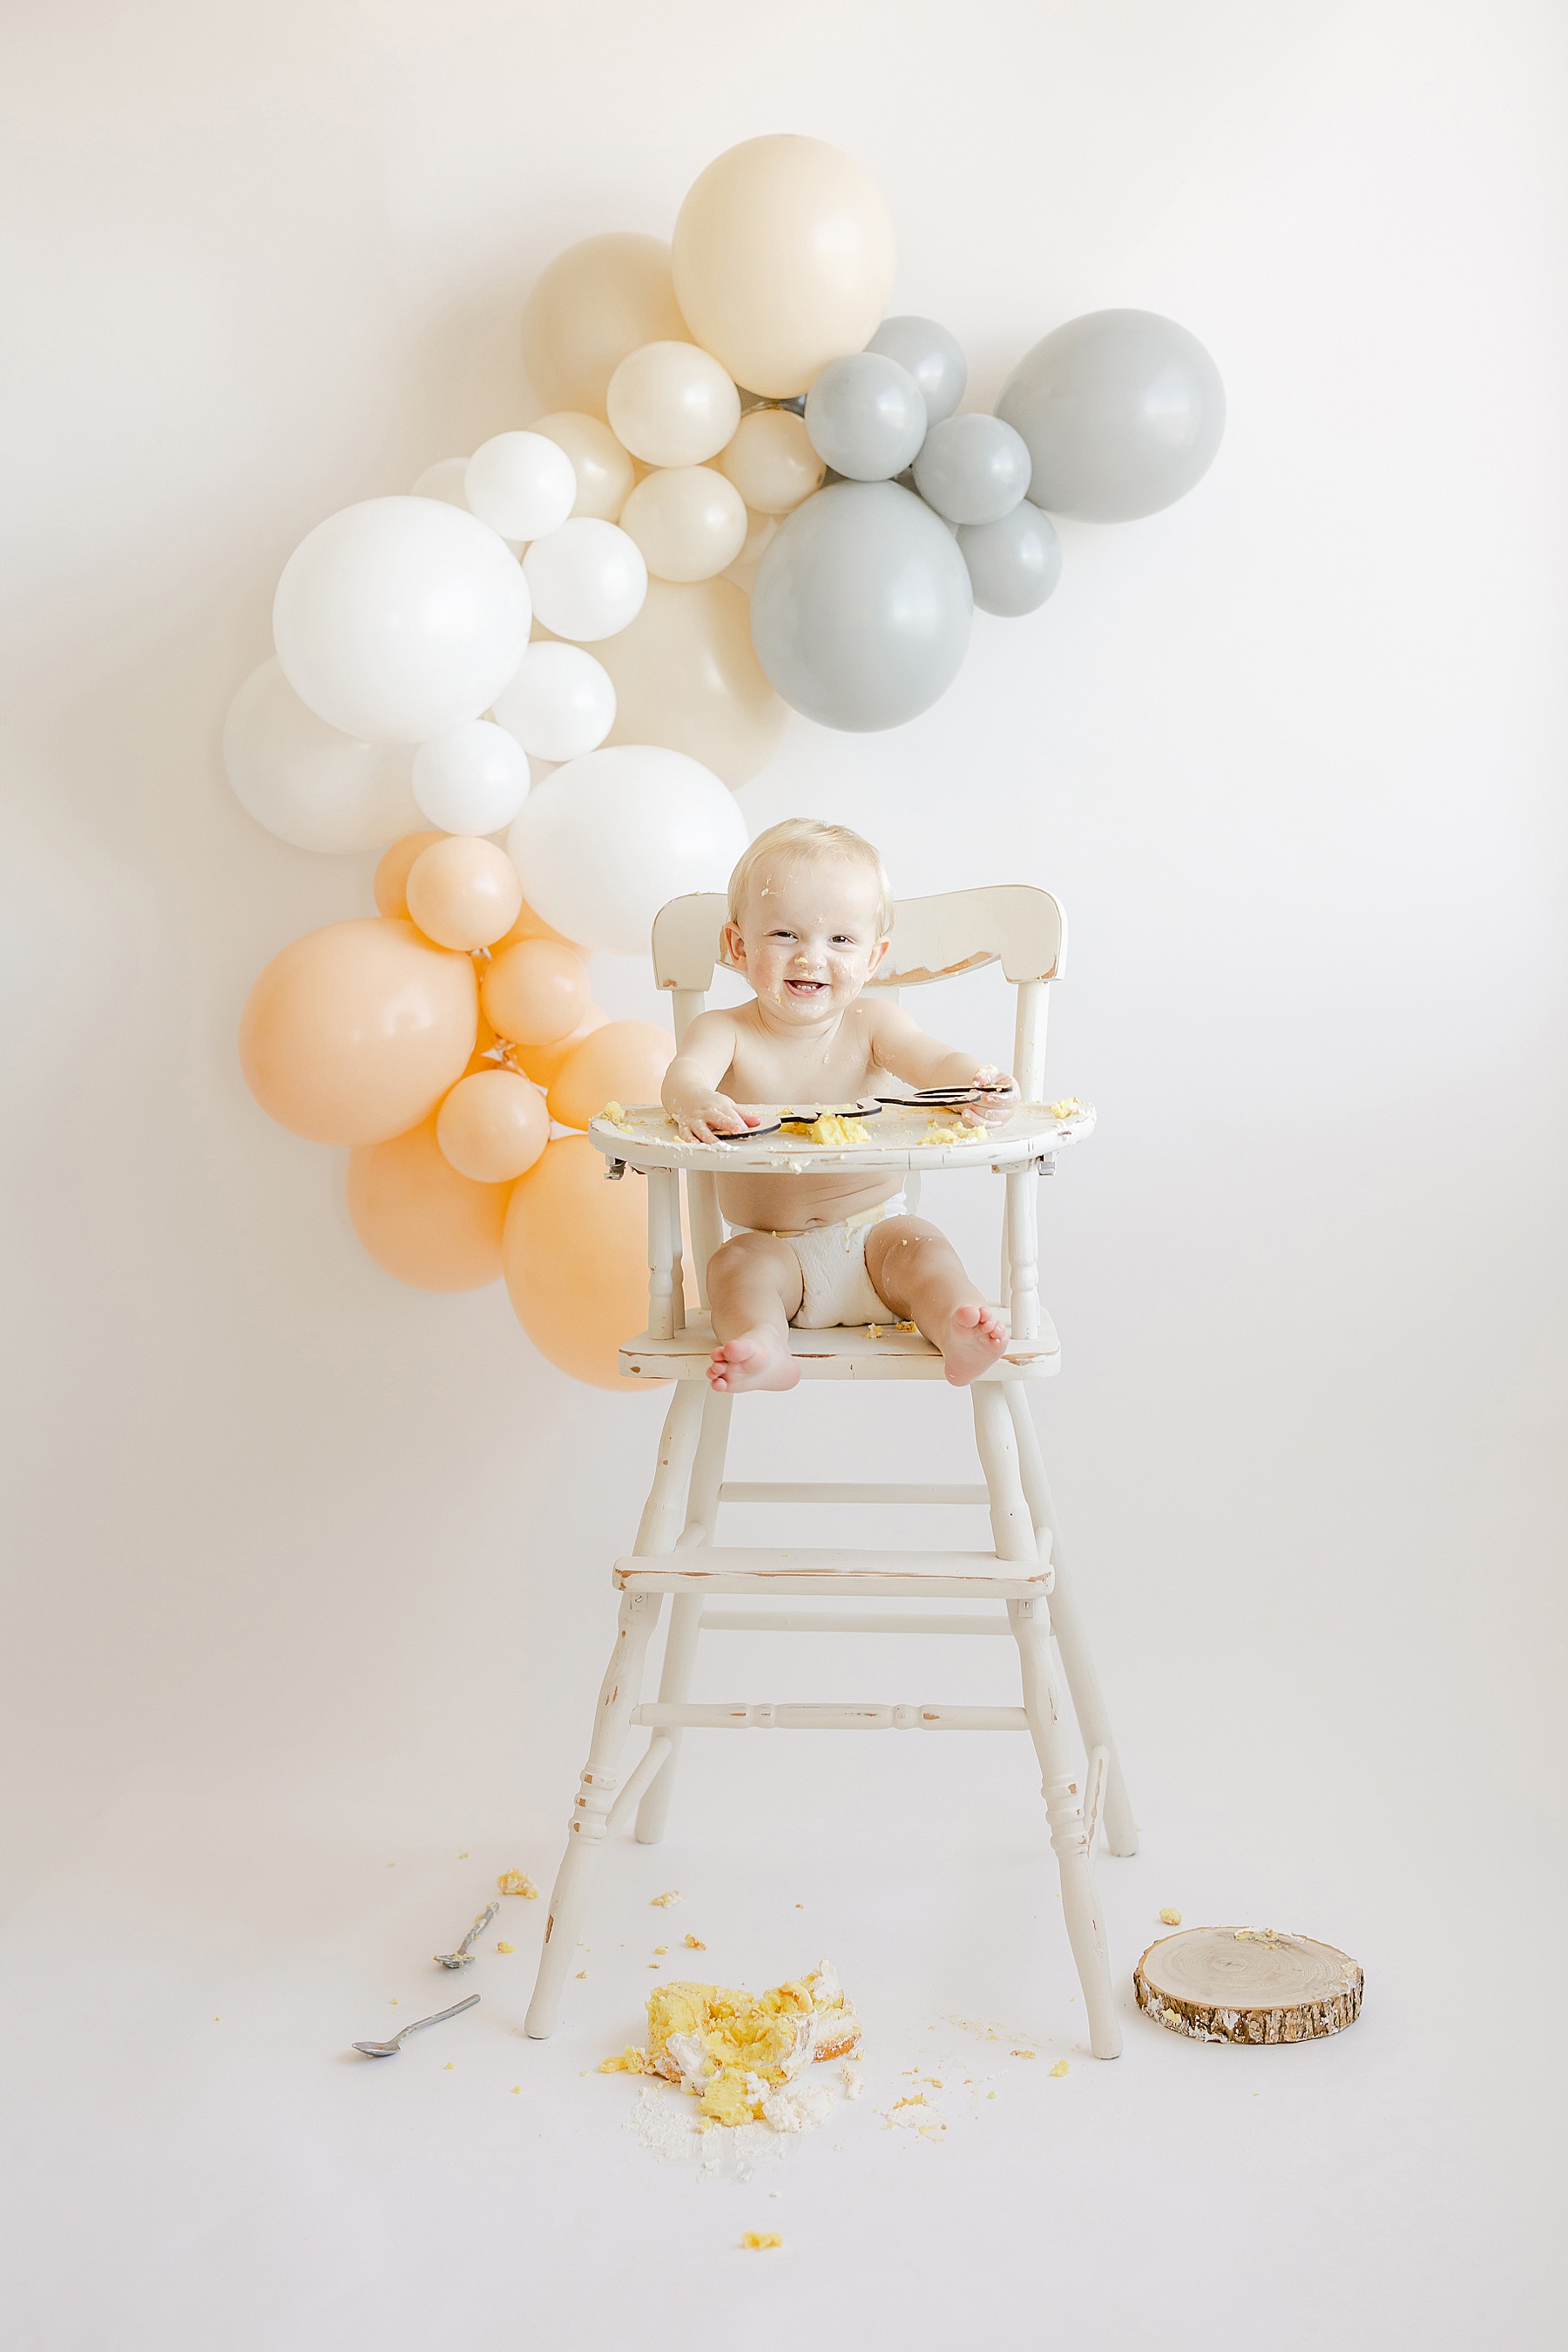 baby boy sitting in white high chair with white background and balloons eating yellow and white cake and smiling